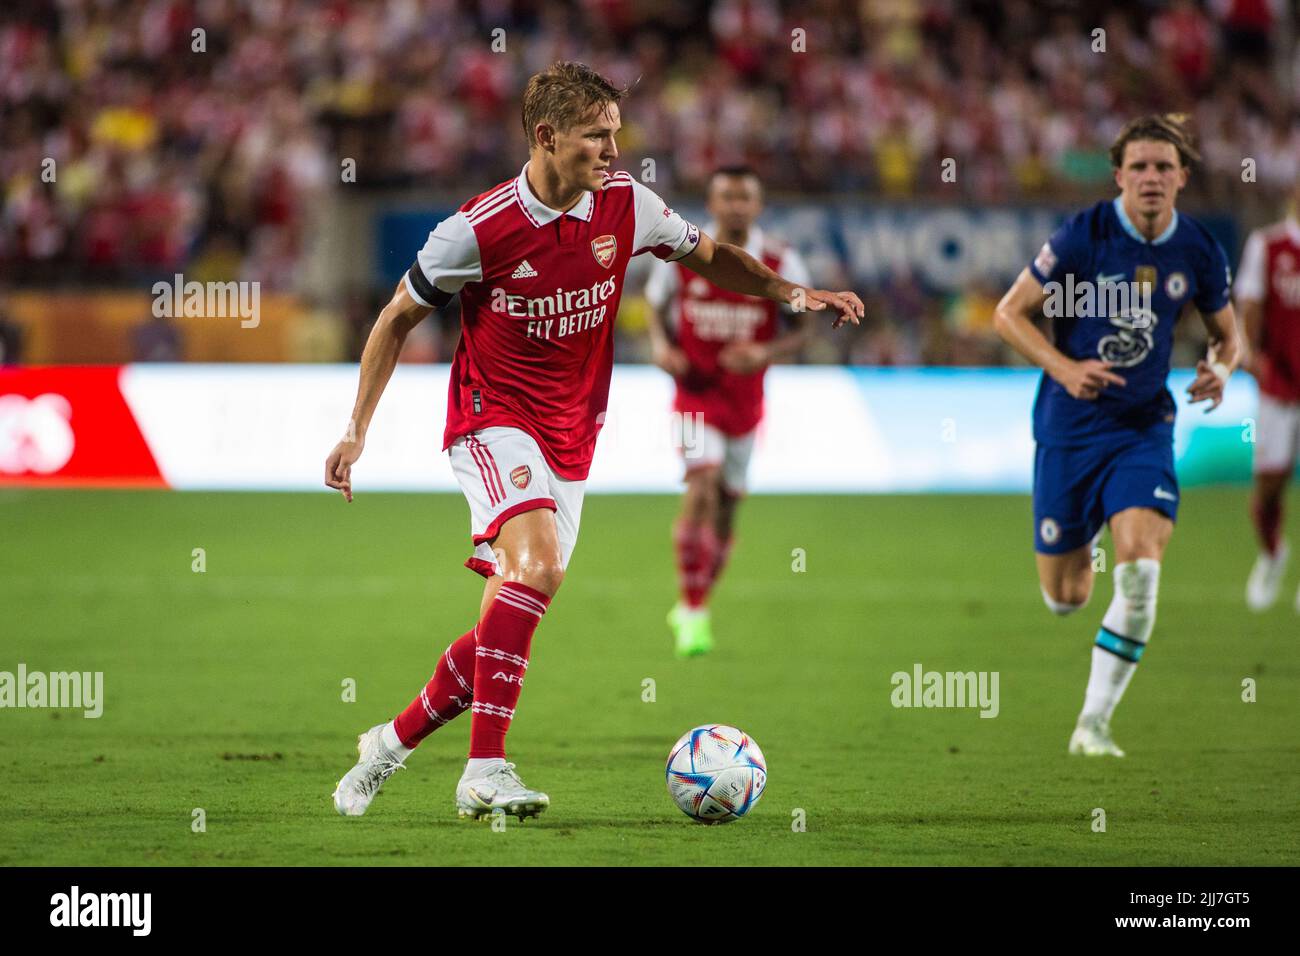 July 23, 2022: Arsenal FC midfielder Martin Odegaard (8) looks for an opening during the Florida Cup match between Arsenal FC and Chelsea FC Orlando, FL. Jonathan Huff/CSM. Stock Photo